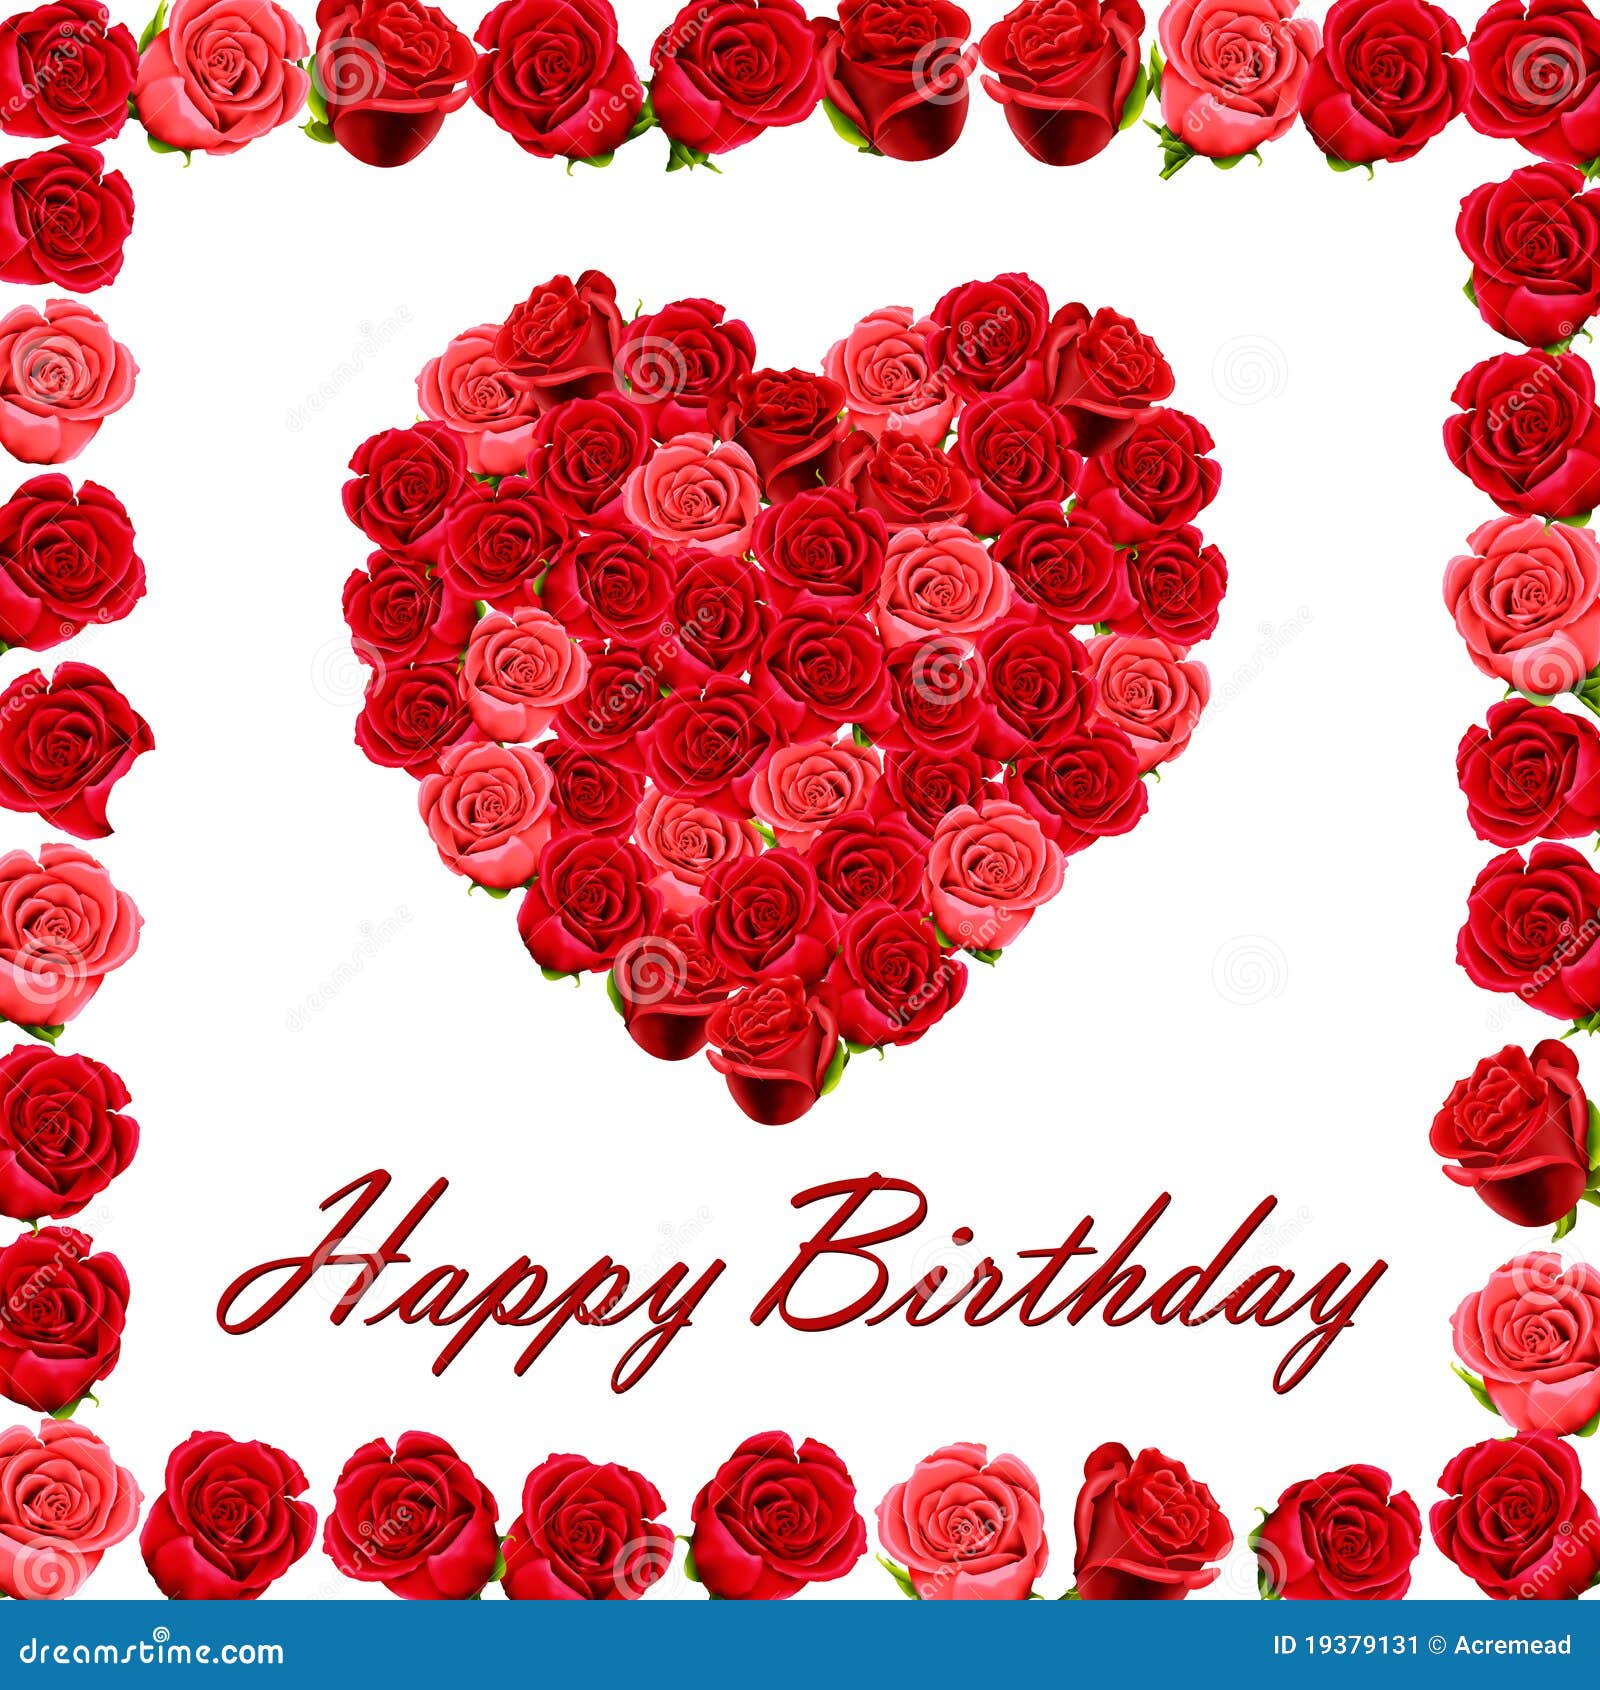  Happy  Birthday  With A Heart  Of Roses Stock Image Image 